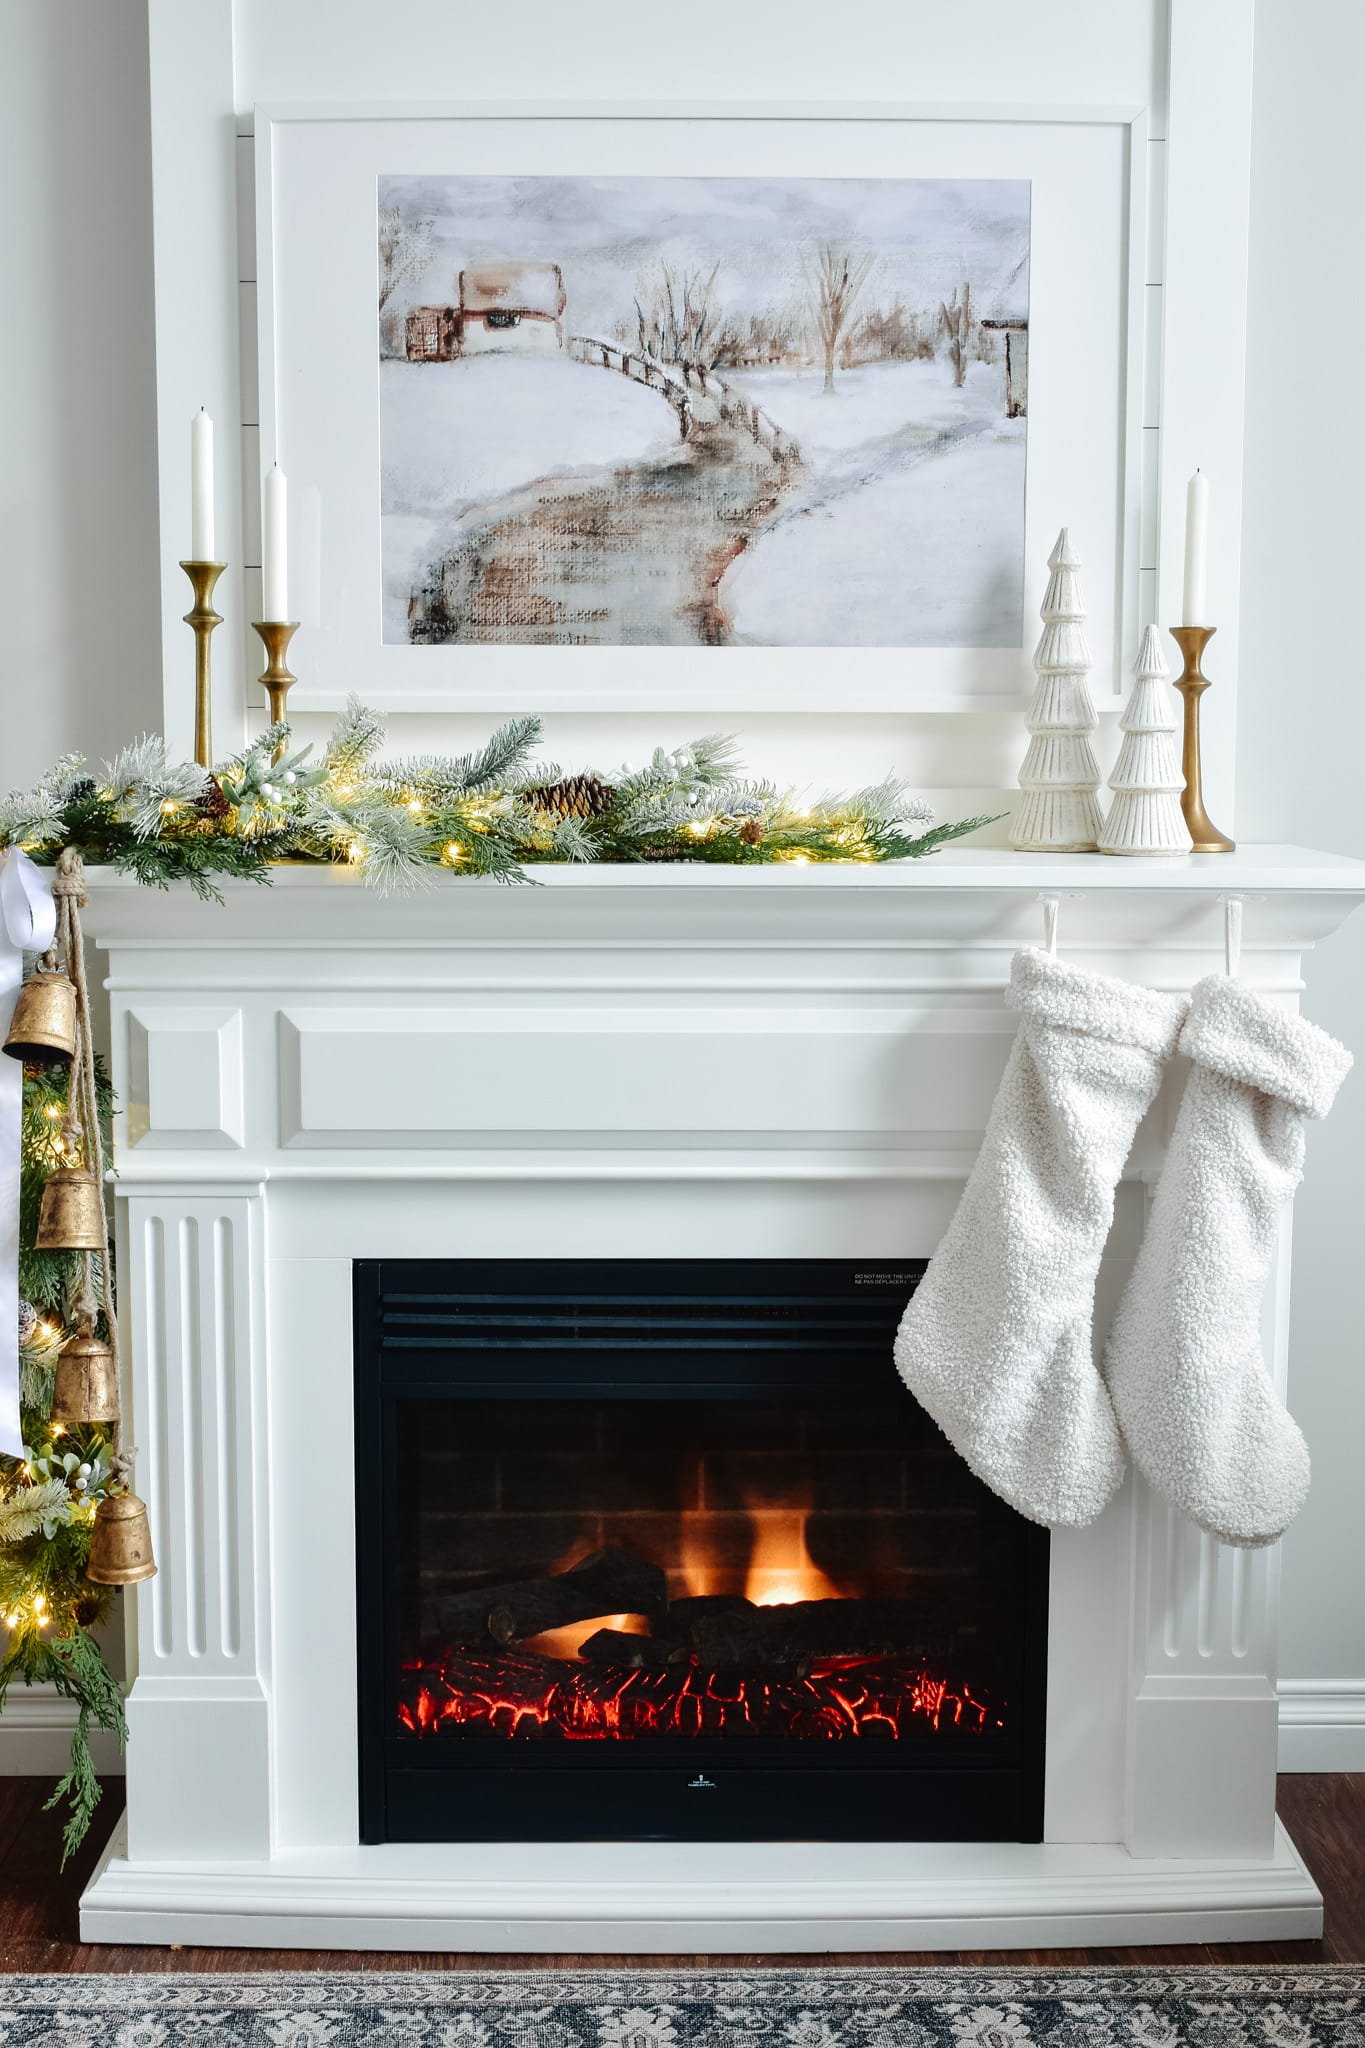 Create a Magical Christmas Mantel with these Tips